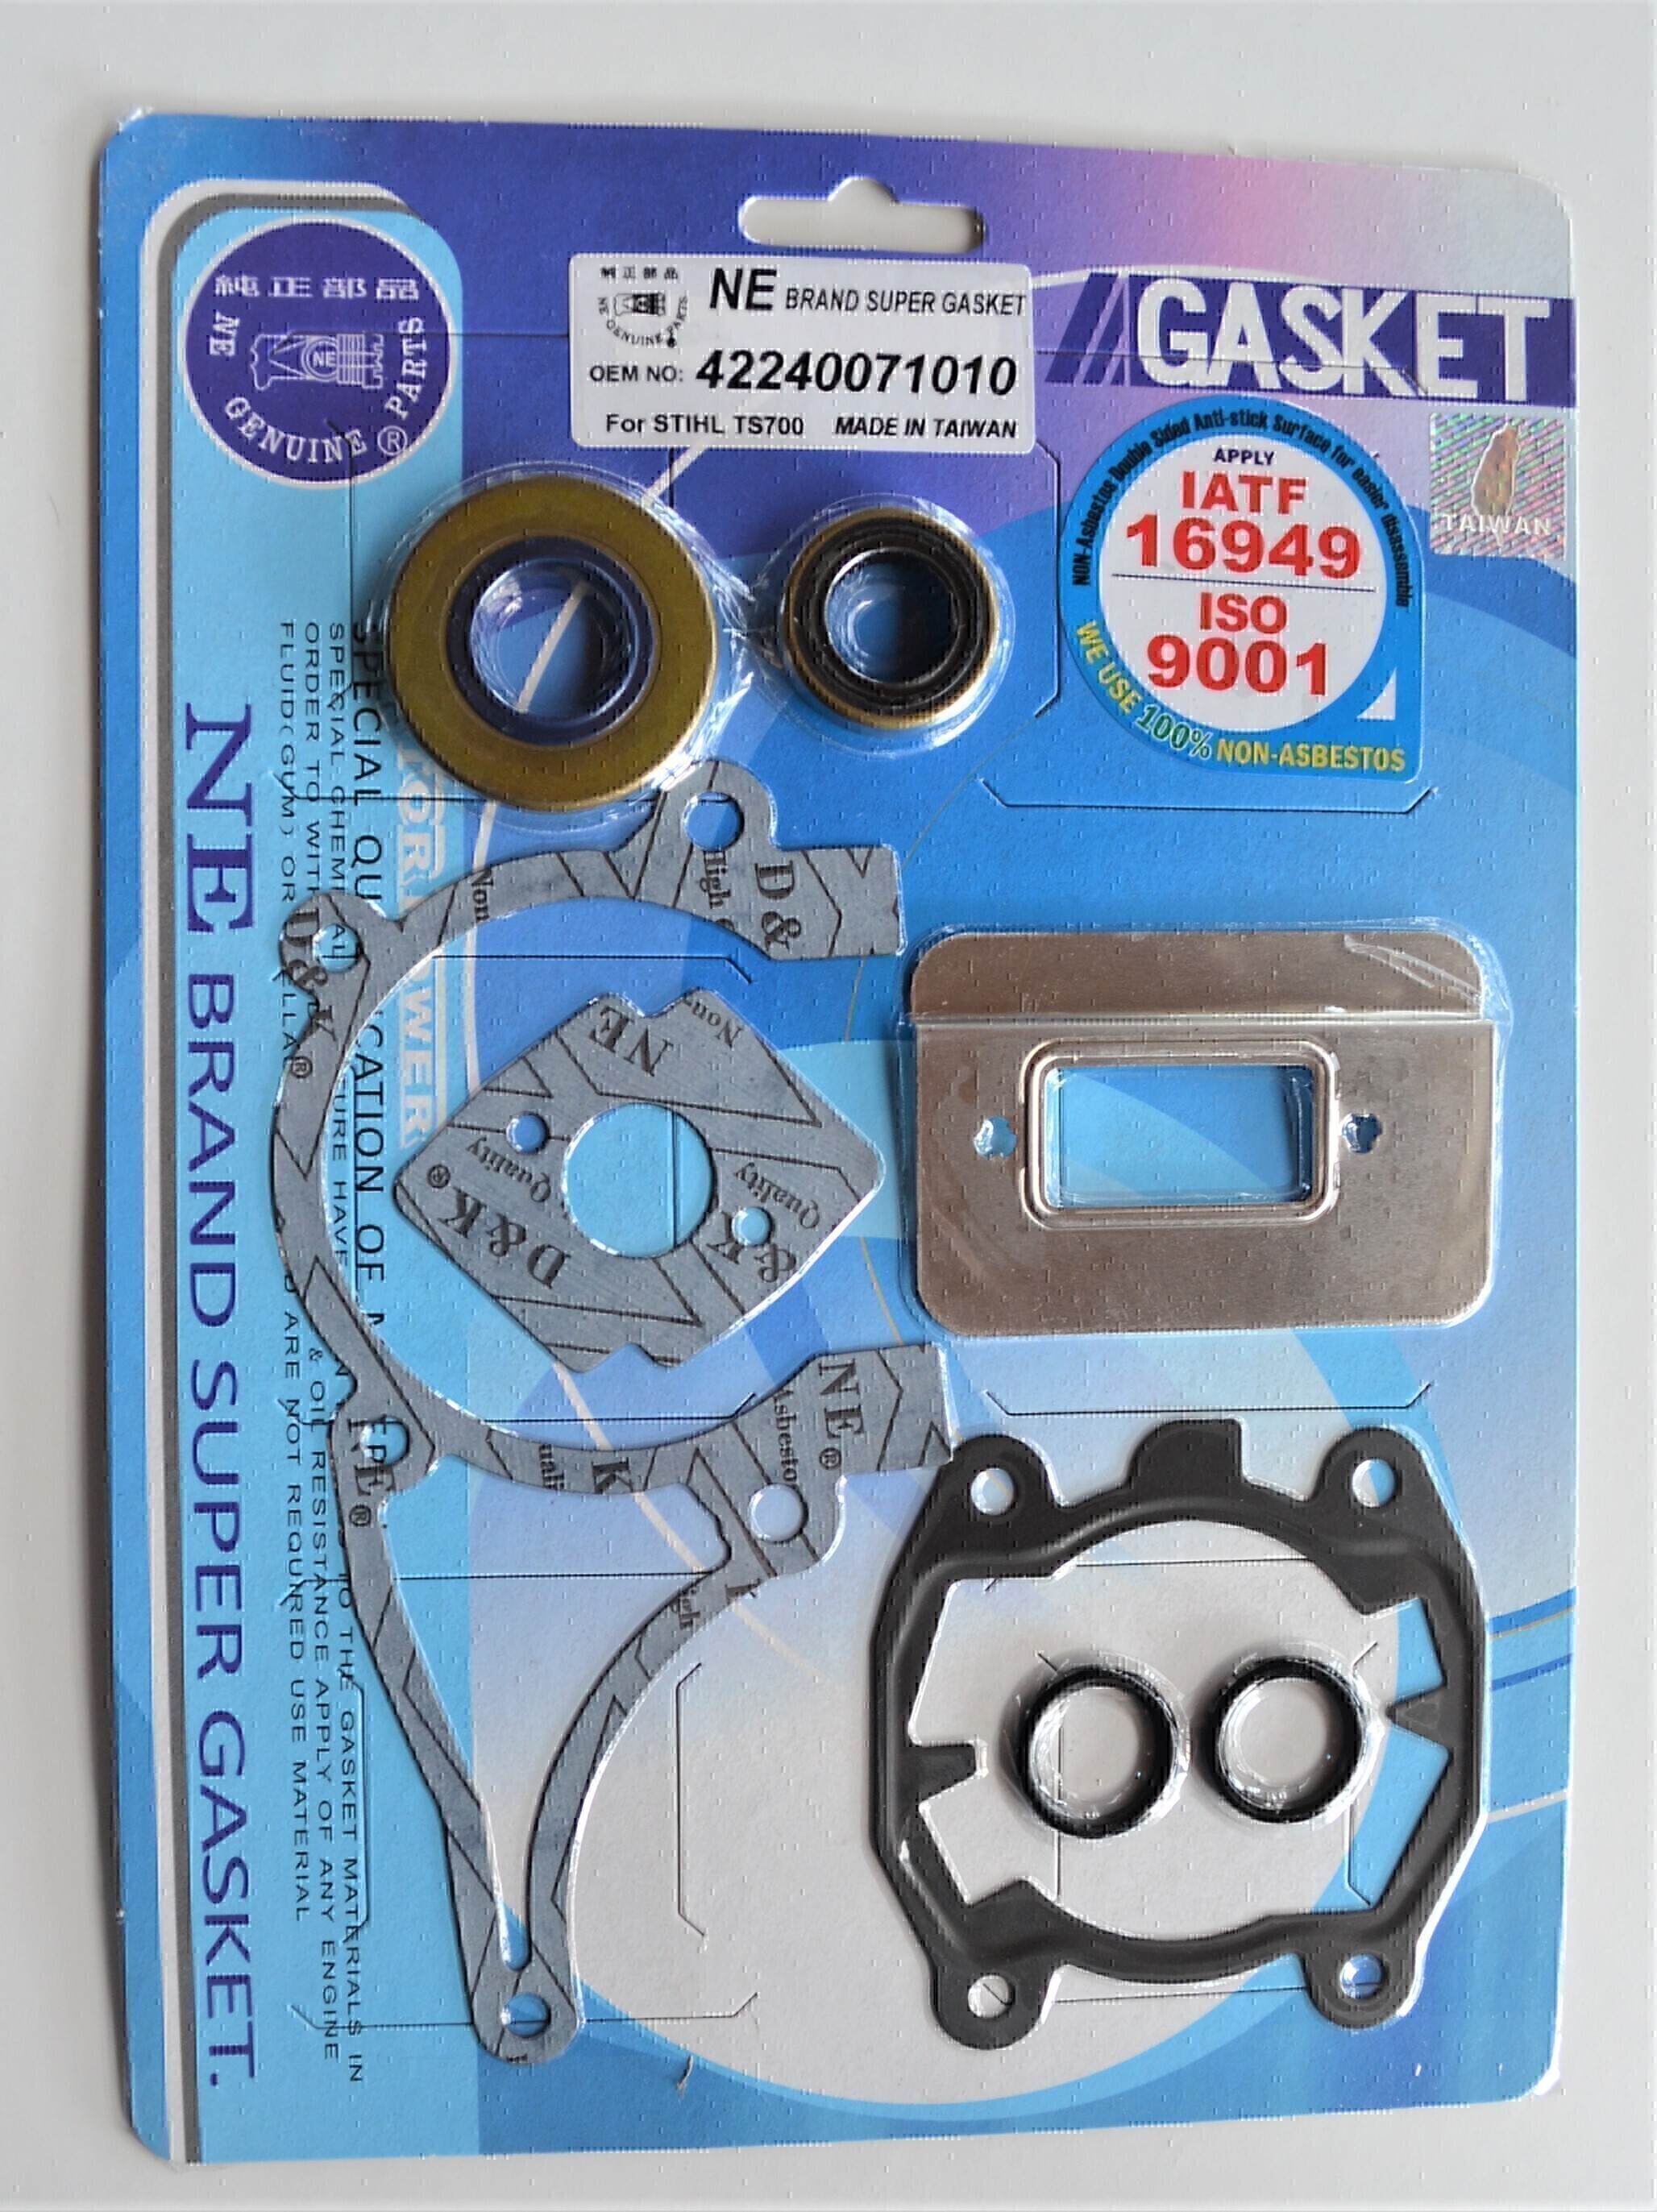 COMPLETE GASKET & OIL SEAL KIT FOR STIHL TS700 TS800 CUT OFF SAW # 42240071010